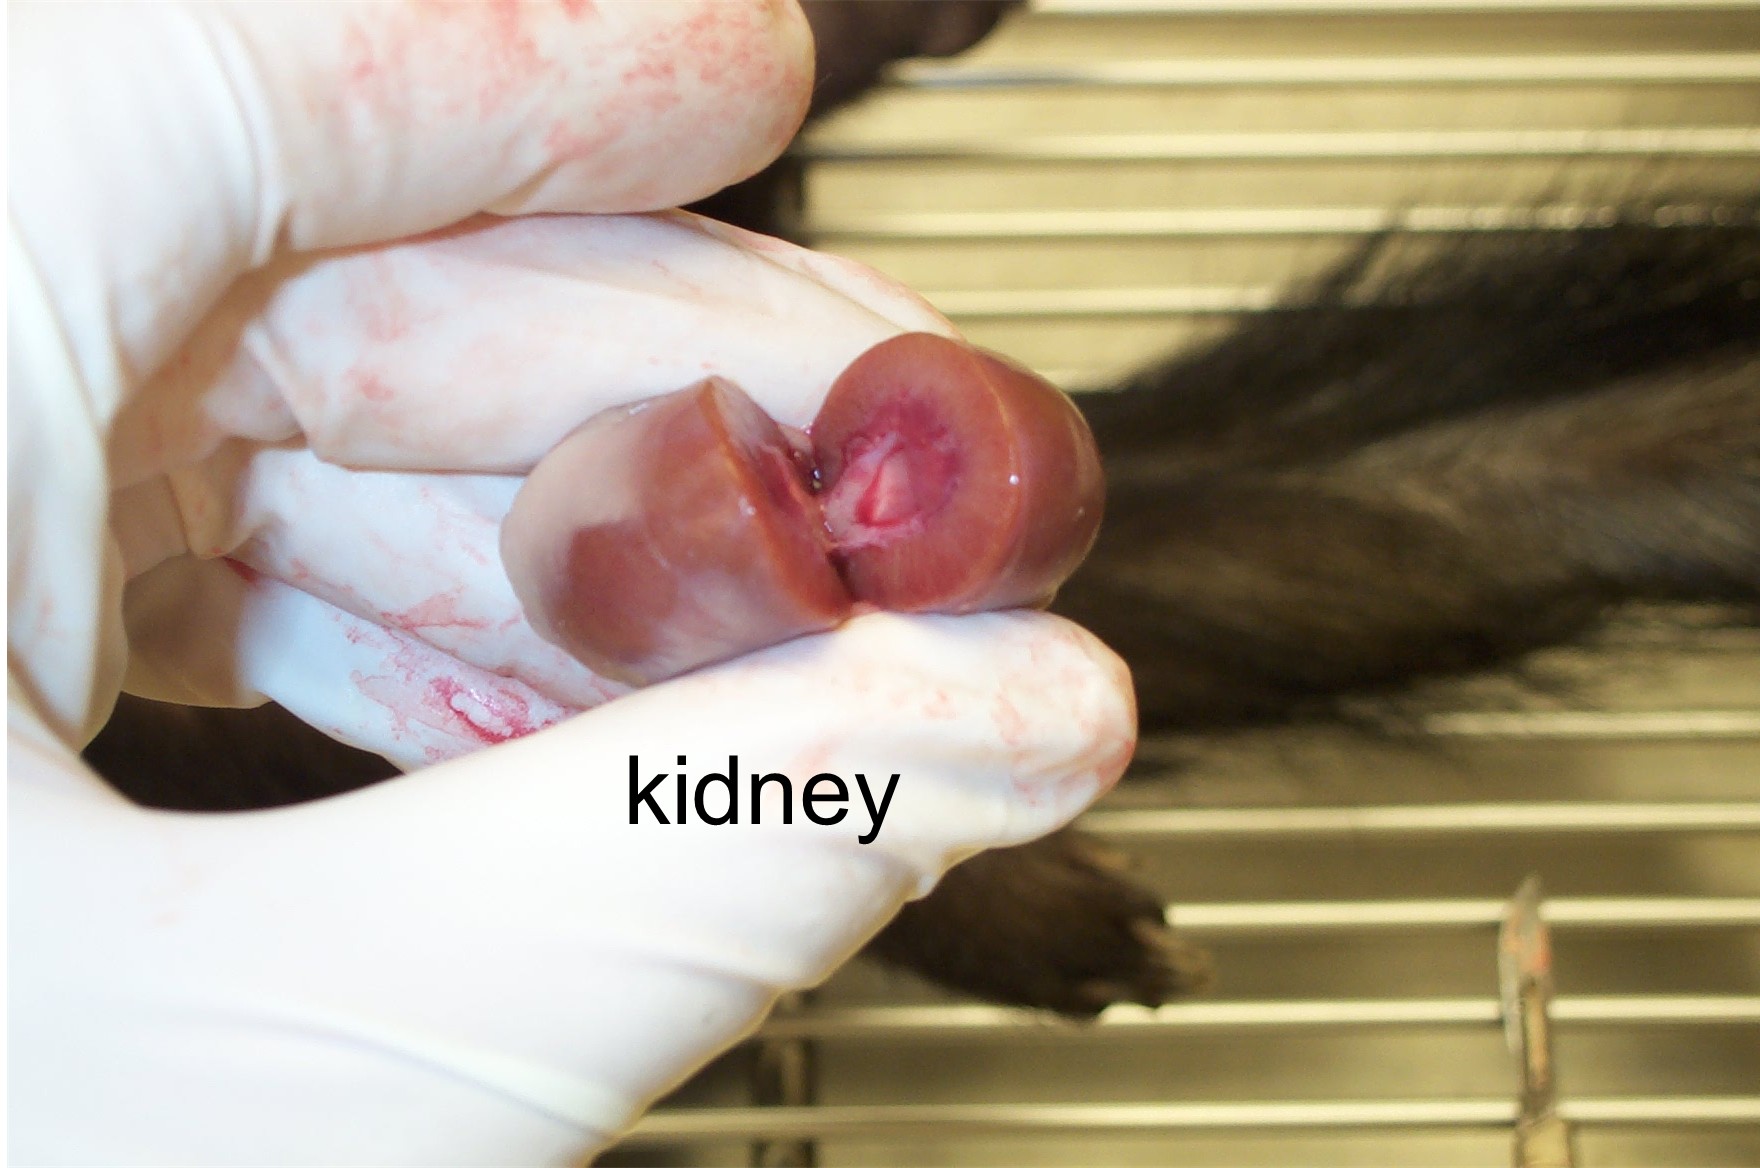 Disected kidney